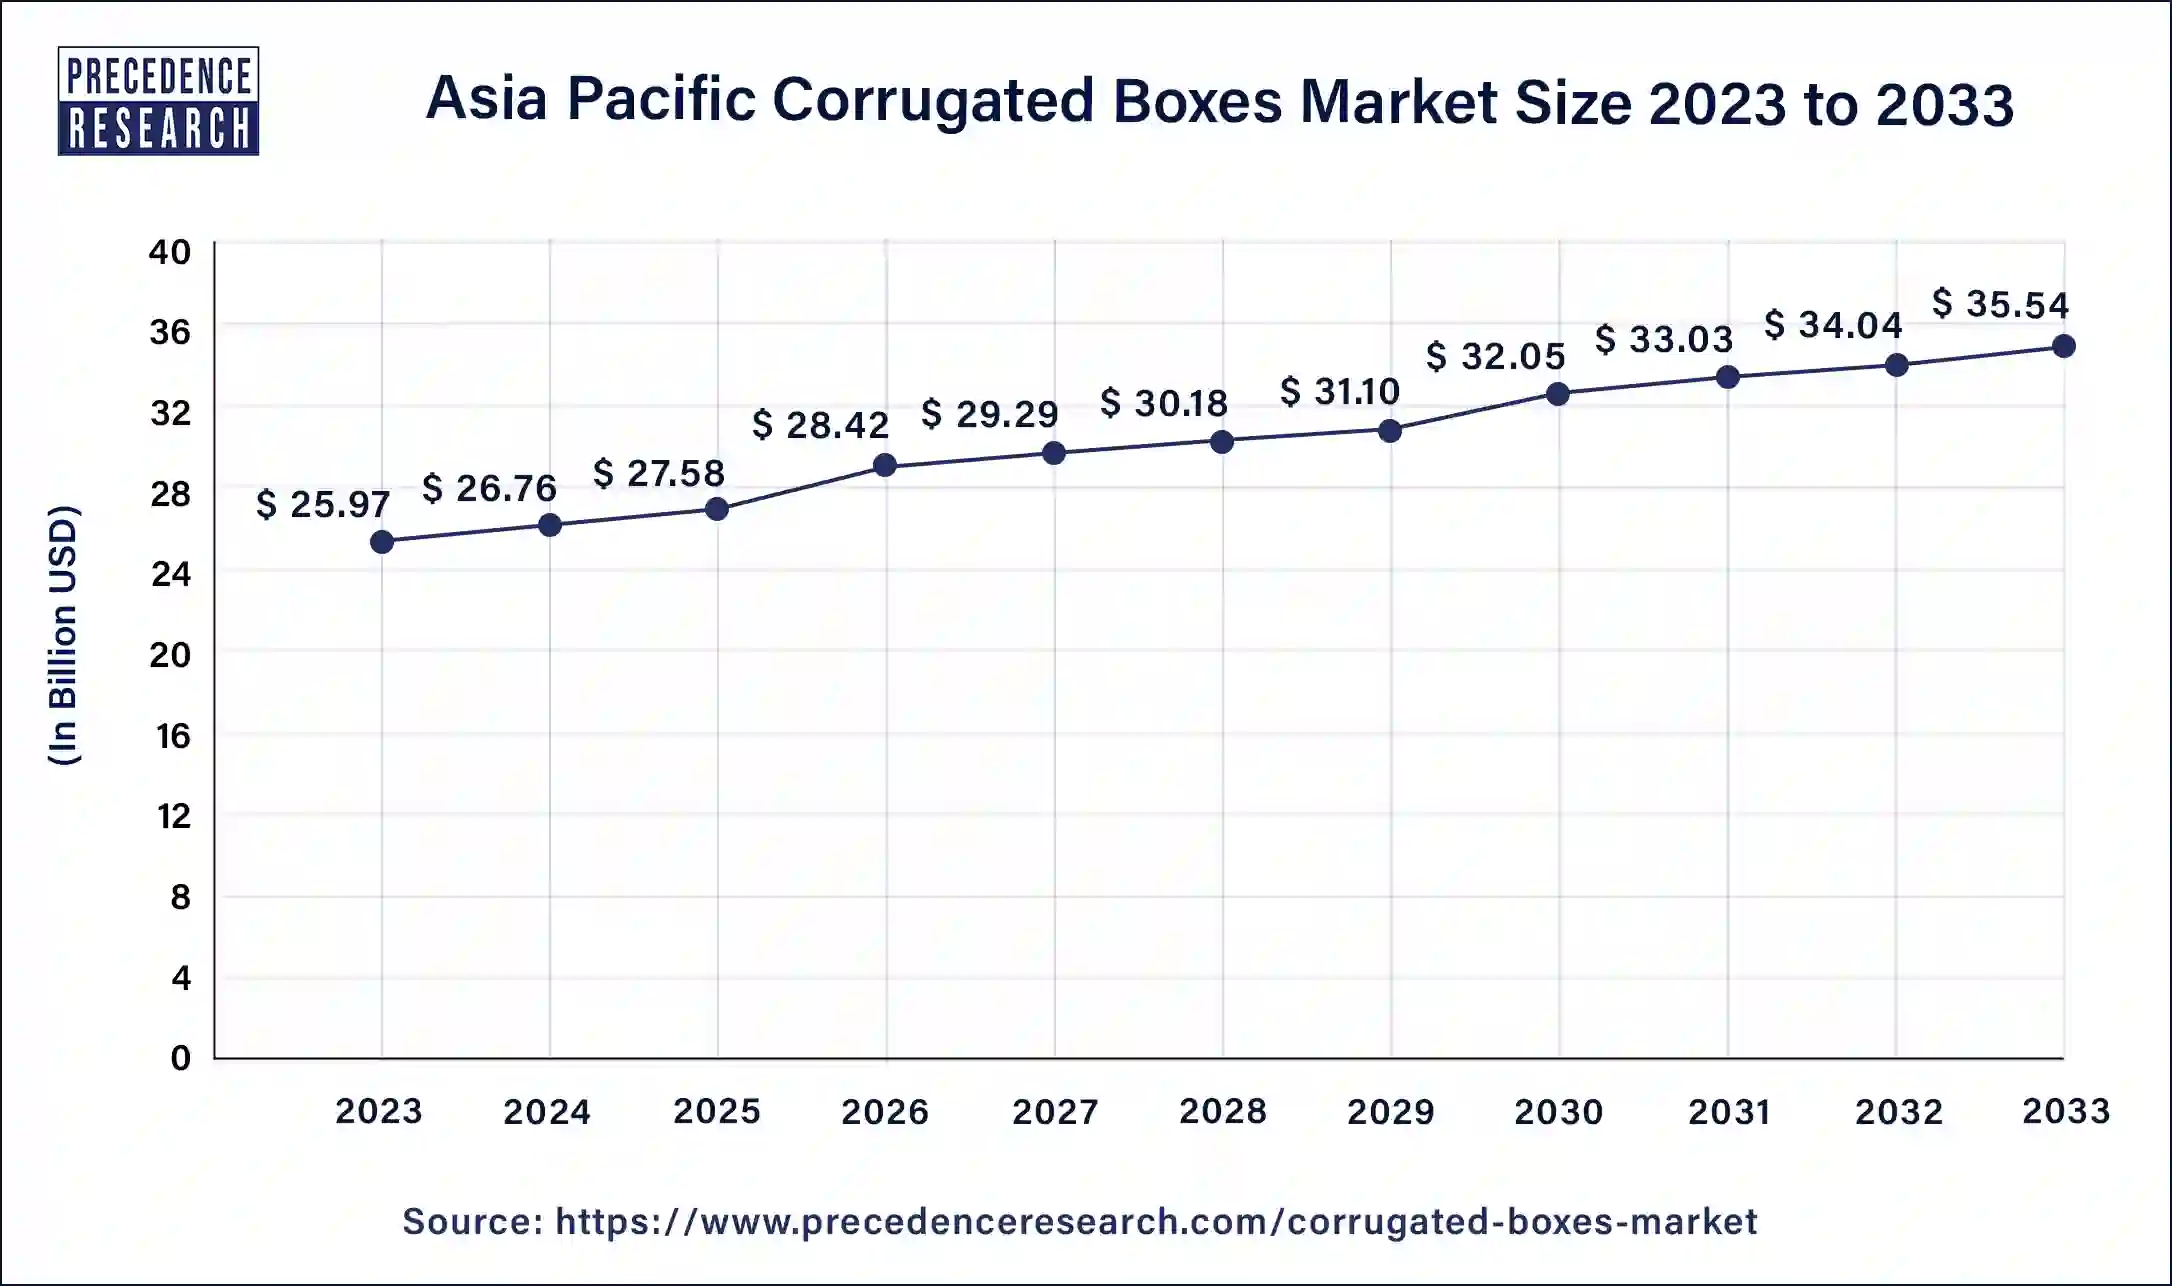 Asia Pacific Corrugated Boxes Market Size 2024 to 2033